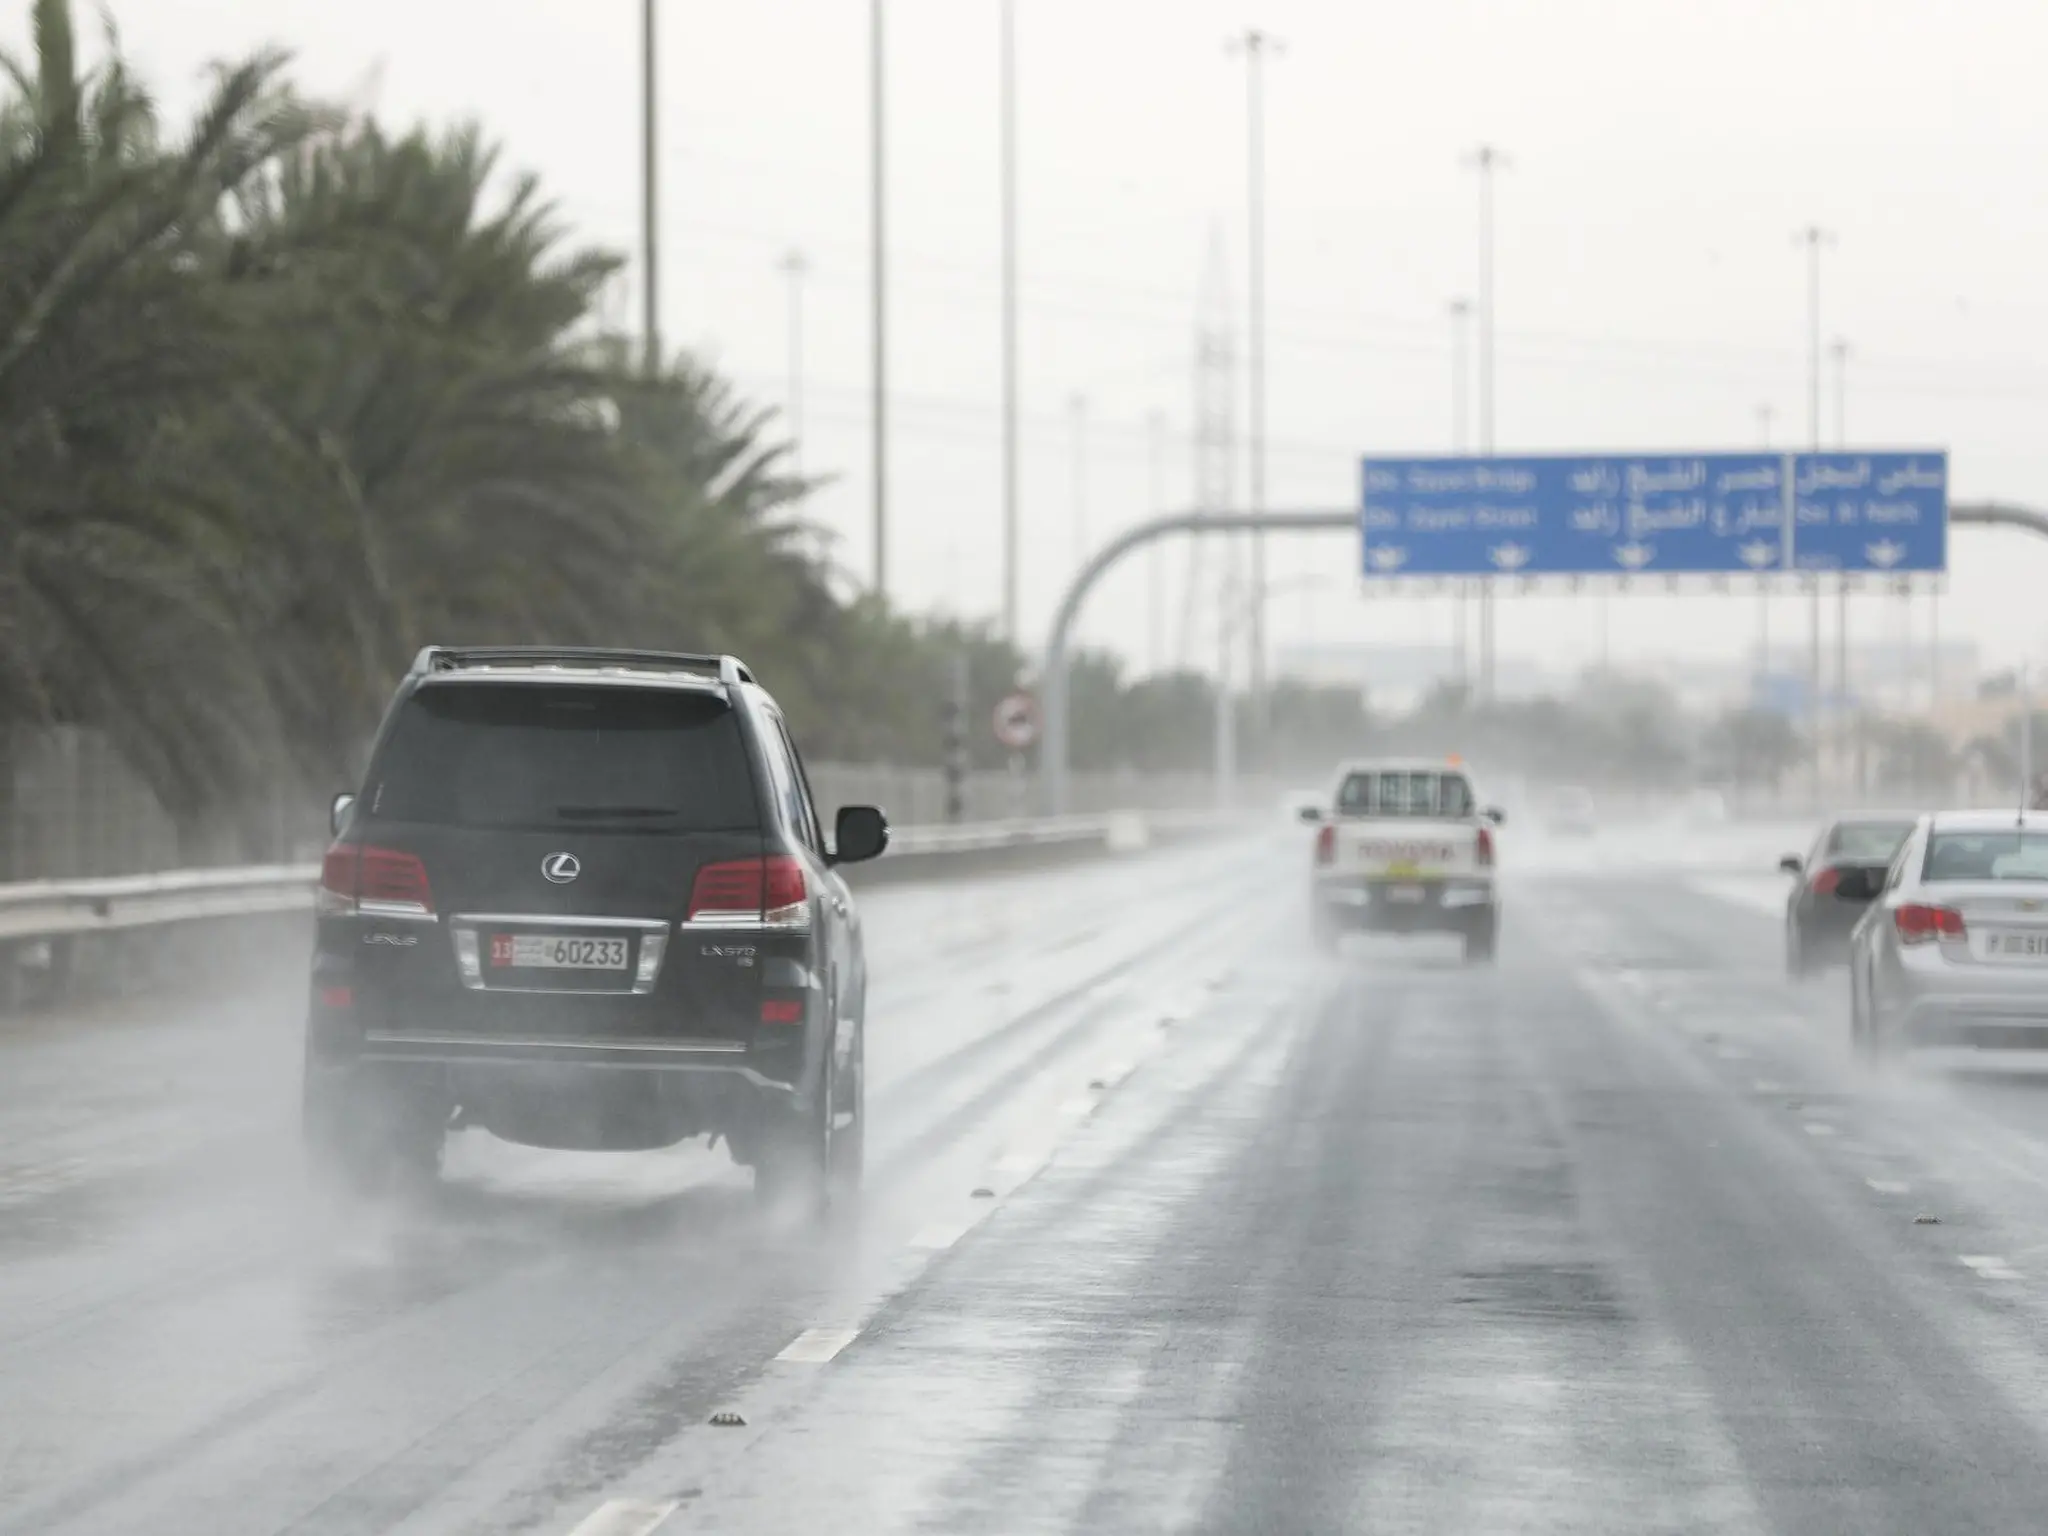 UAE weather: Today could be rainy, with gusts that could blow dust